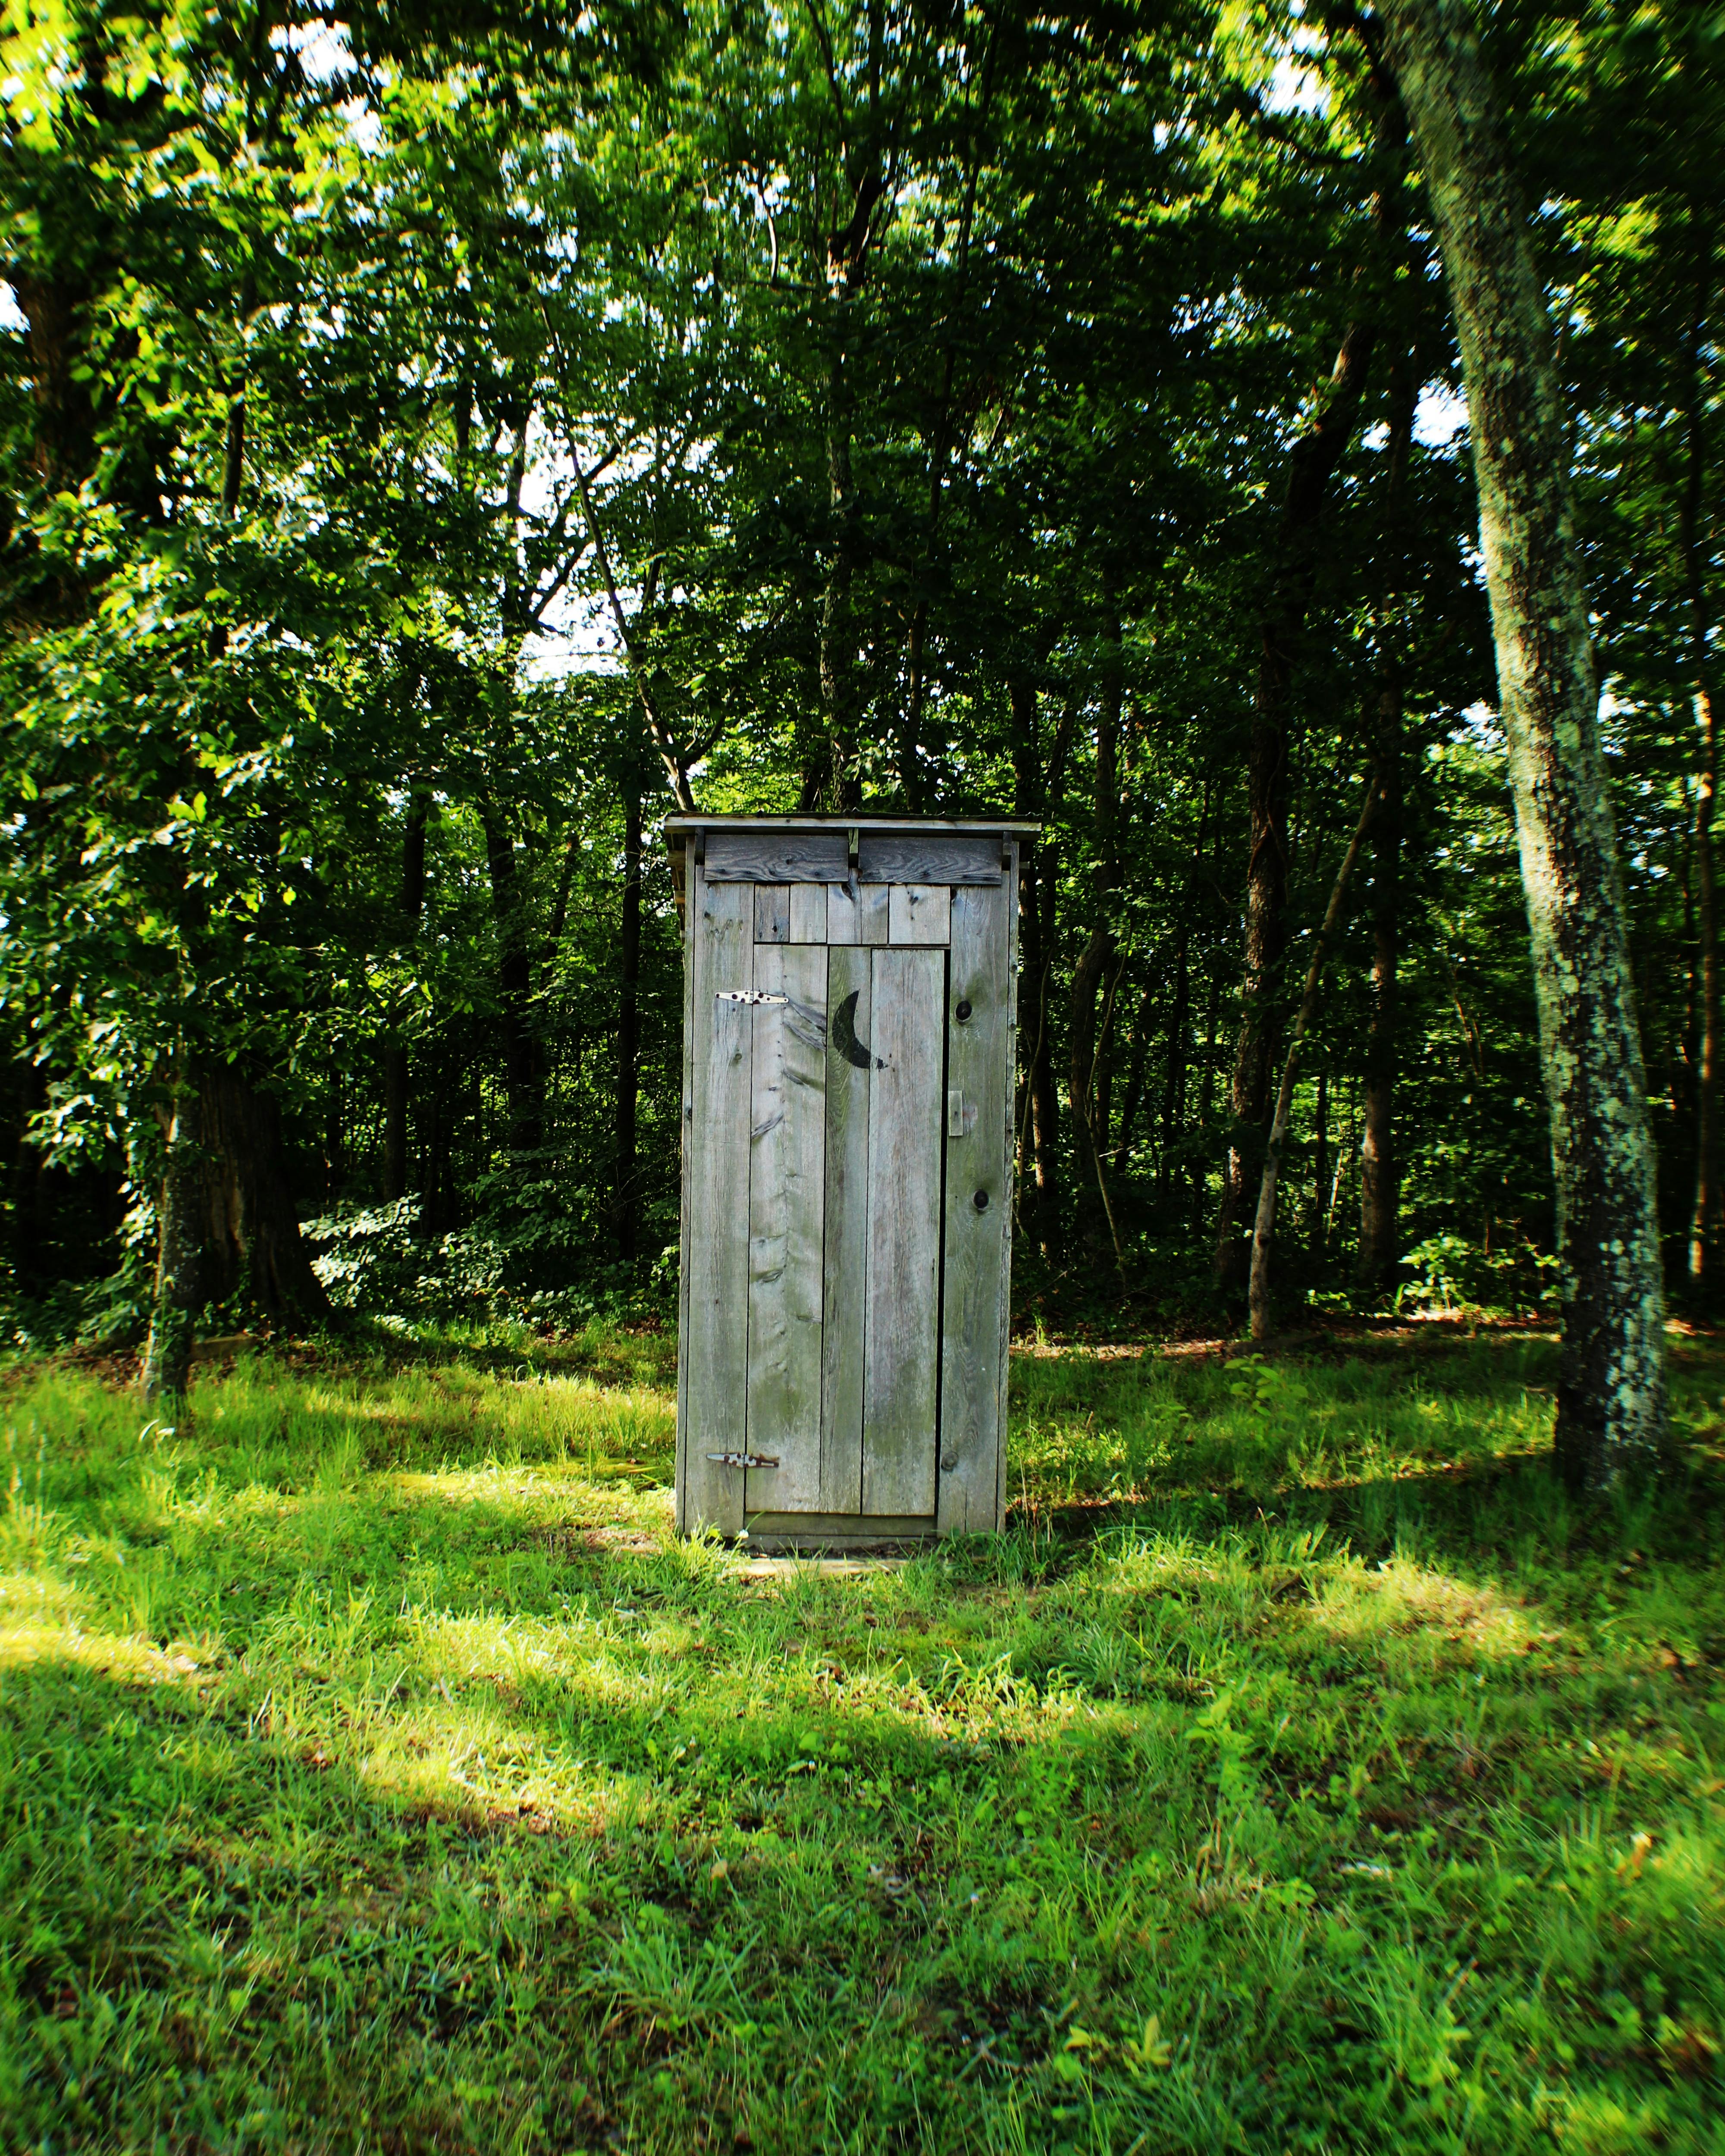 A wooden outhouse standing in a green forest with a moon carved into the door